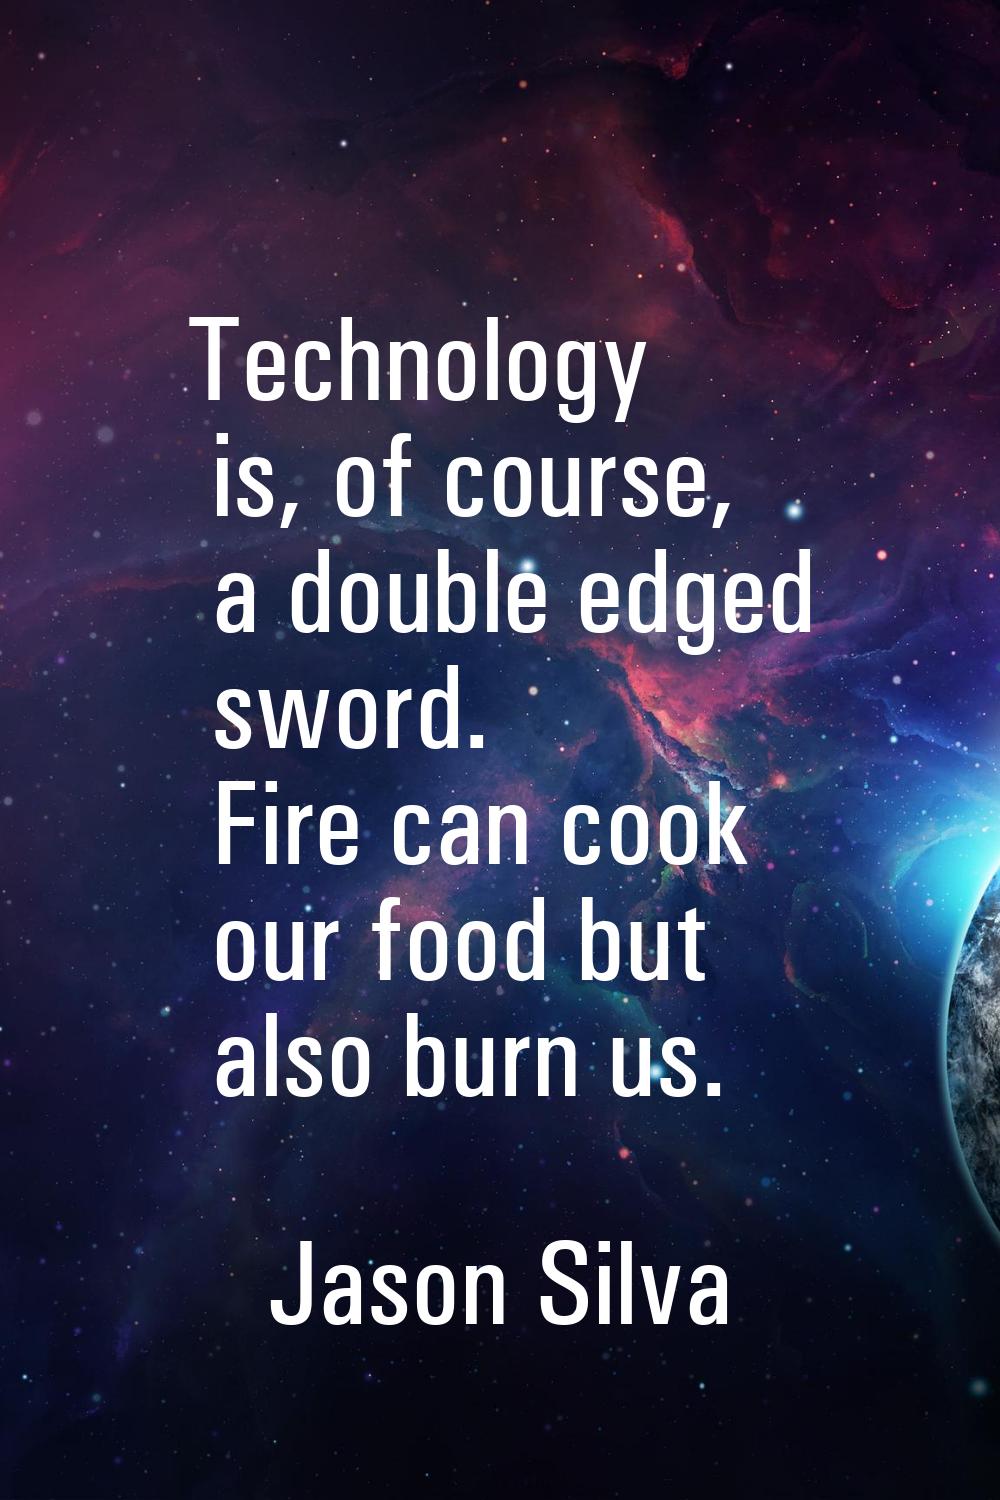 Technology is, of course, a double edged sword. Fire can cook our food but also burn us.